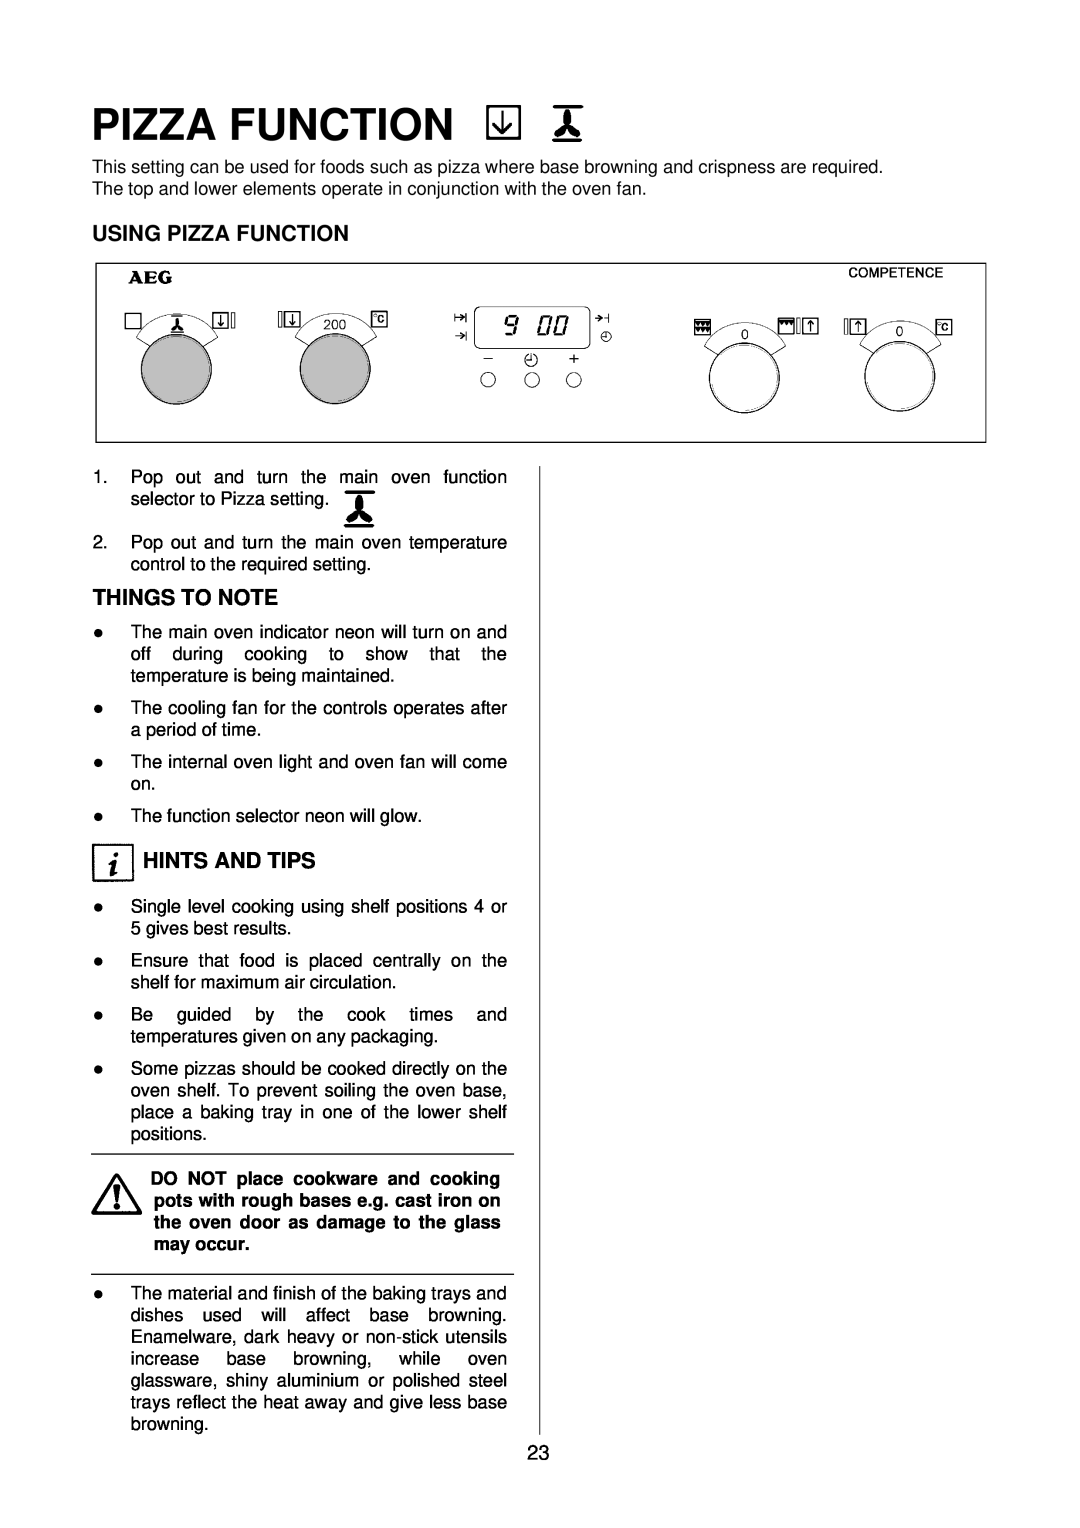 AEG D4100-1 manual Using Pizza Function, Things To Note, Hints And Tips 